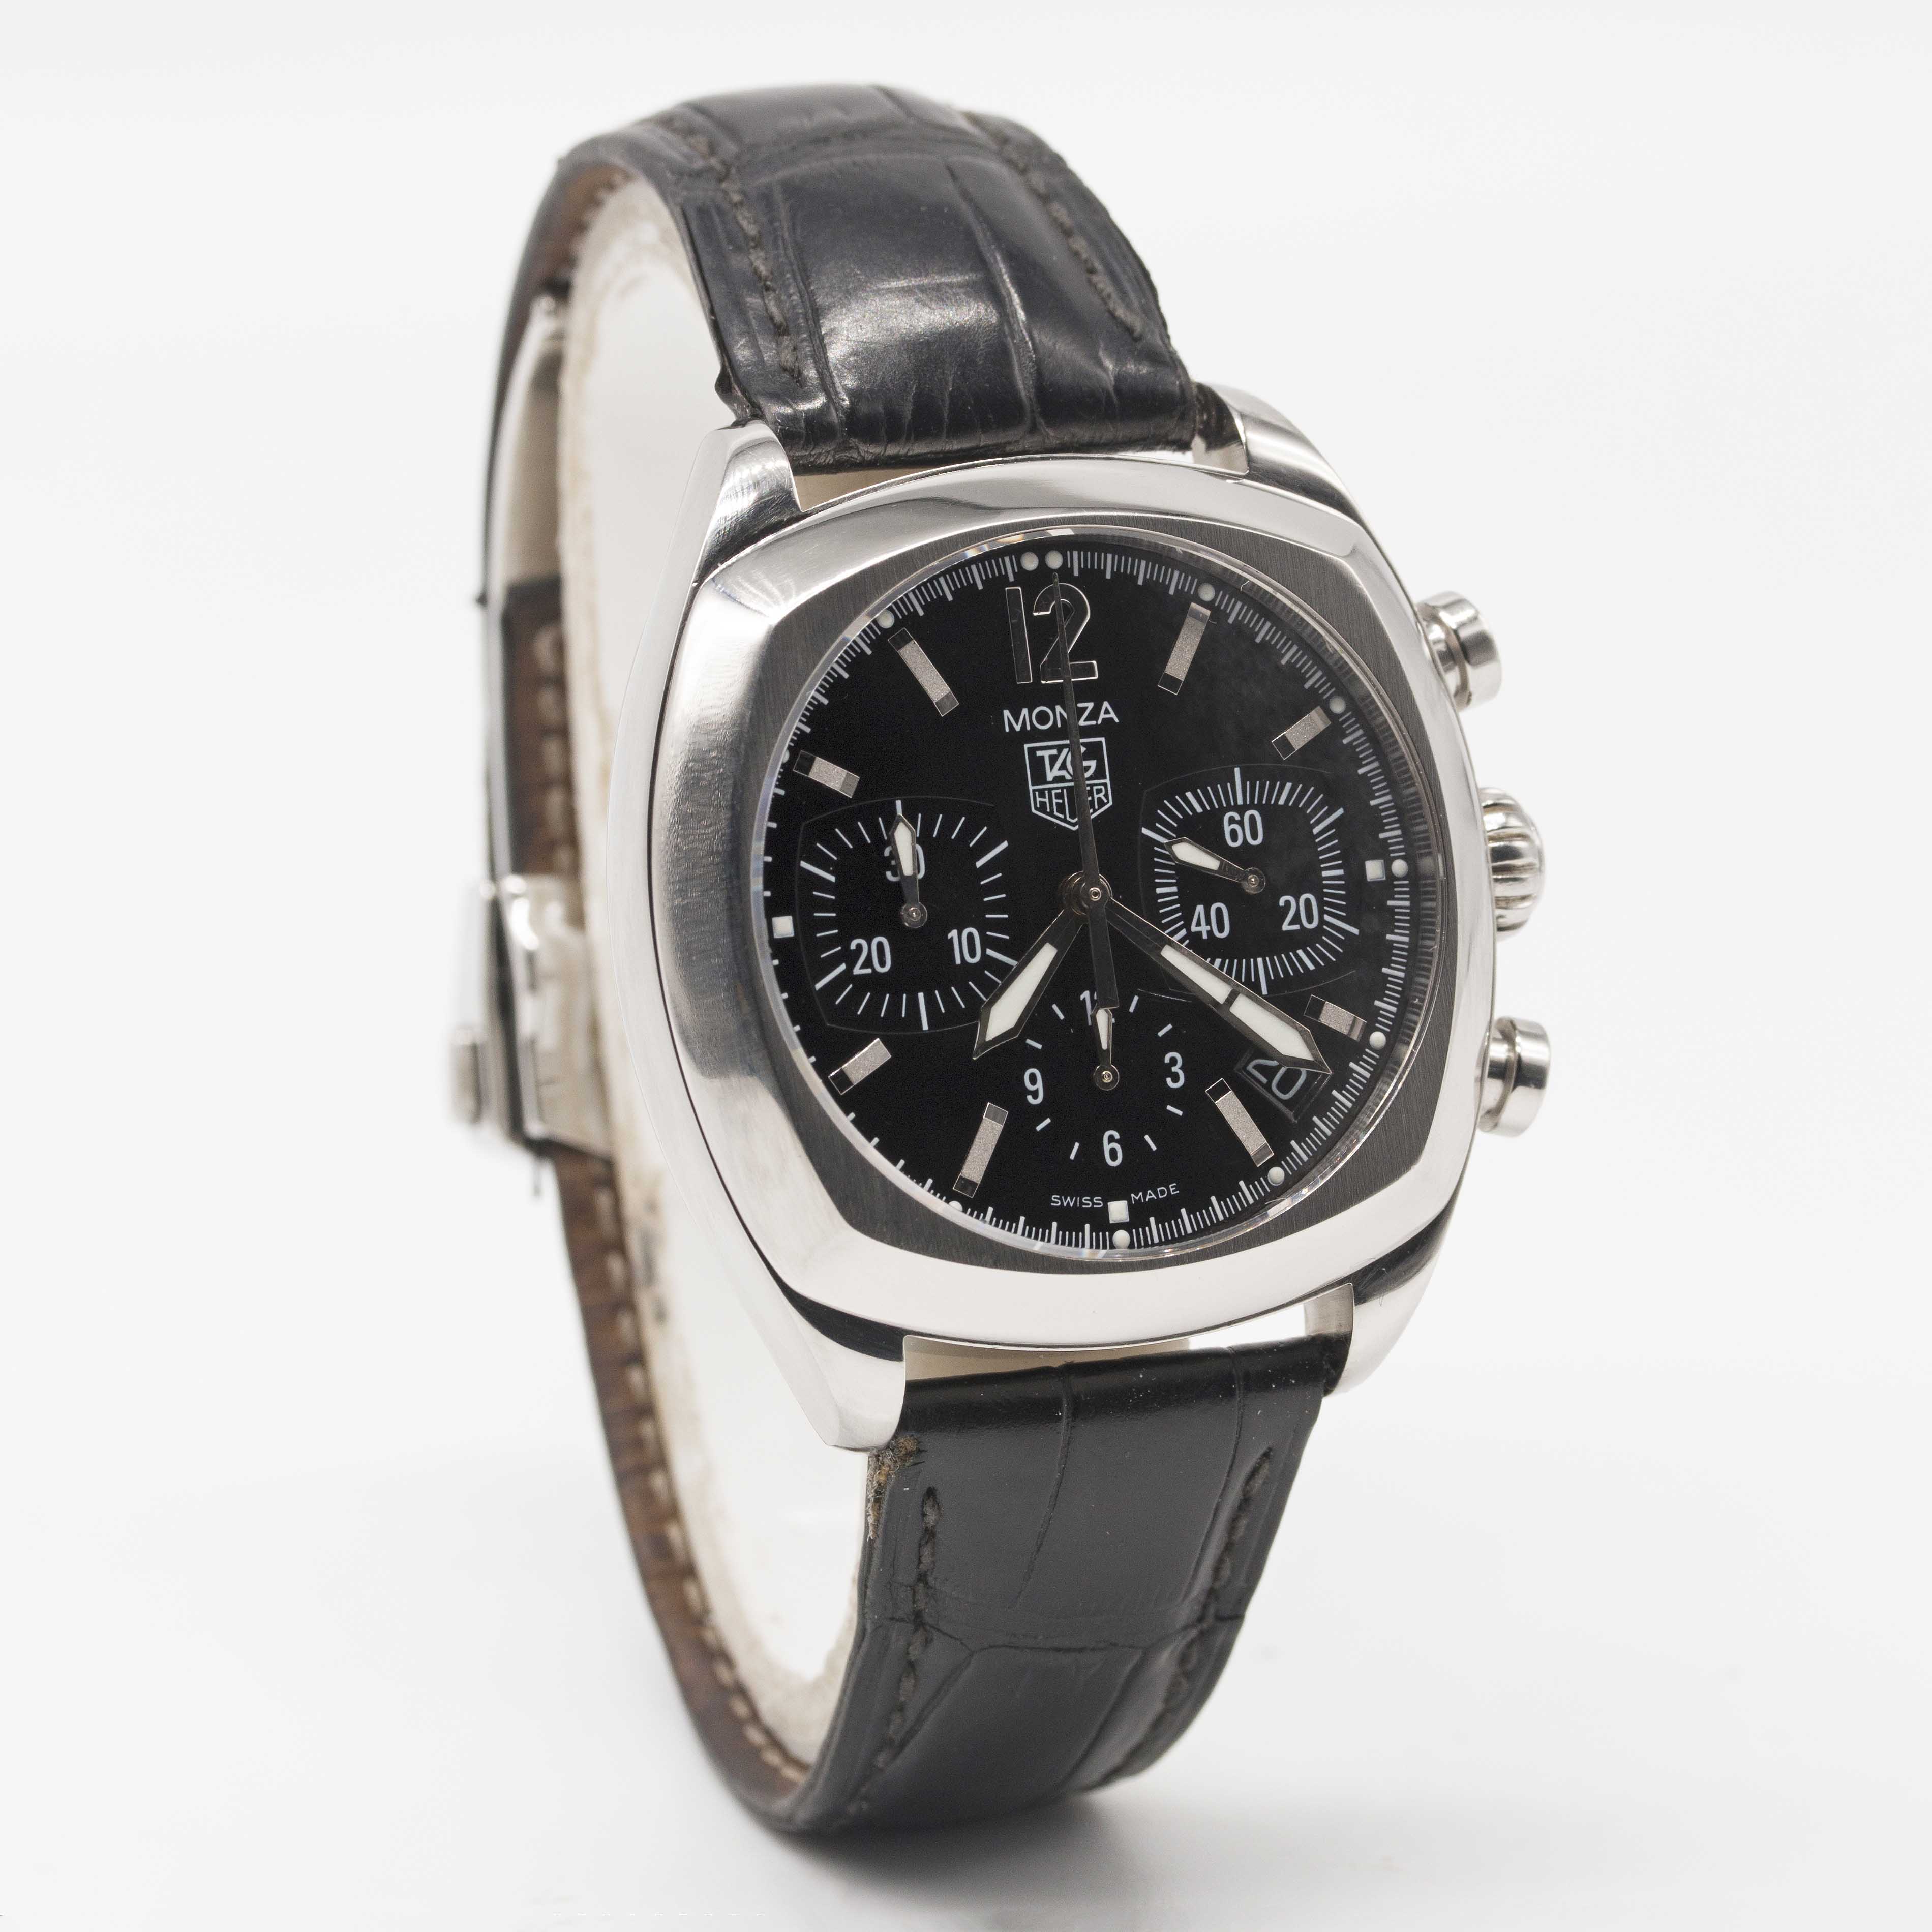 A GENTLEMAN'S STAINLESS STEEL TAG HEUER MONZA CHRONOGRAPH WRIST WATCH CIRCA 2005, REF. CR2113-0 WITH - Image 4 of 6